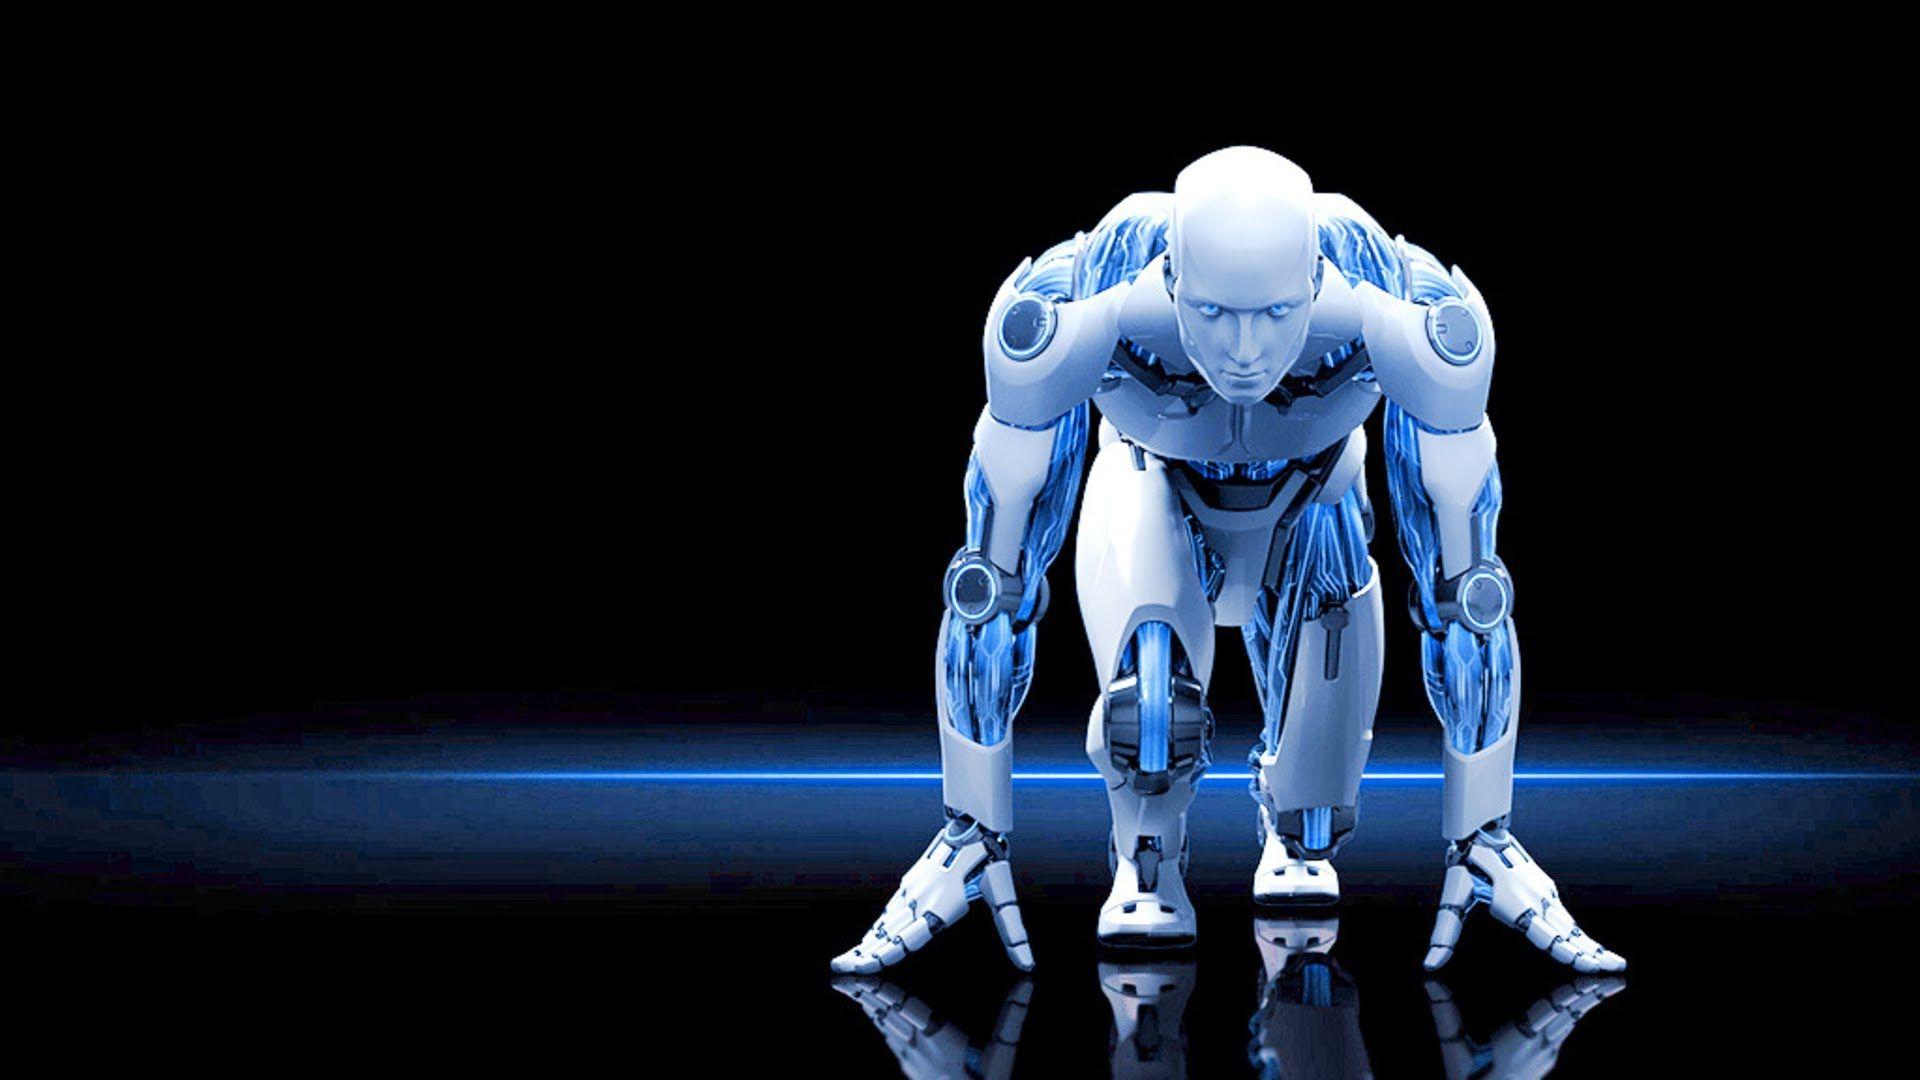 ▻ Cyborg The future of the human. New Tech. Robot